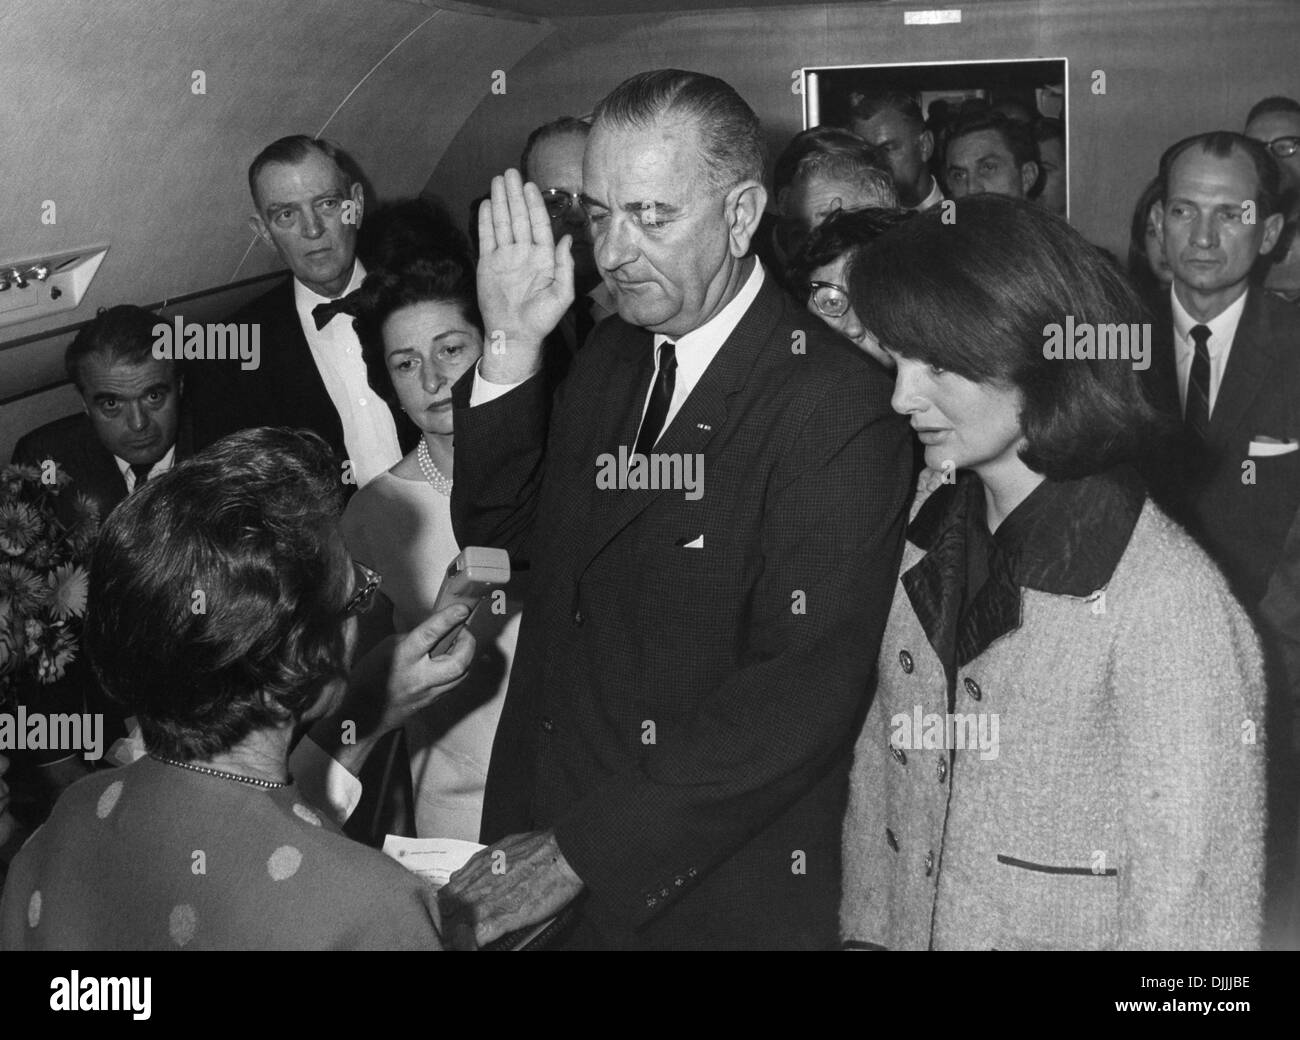 Air Force One 8 12 x 11 image President Johnson Photo 1968